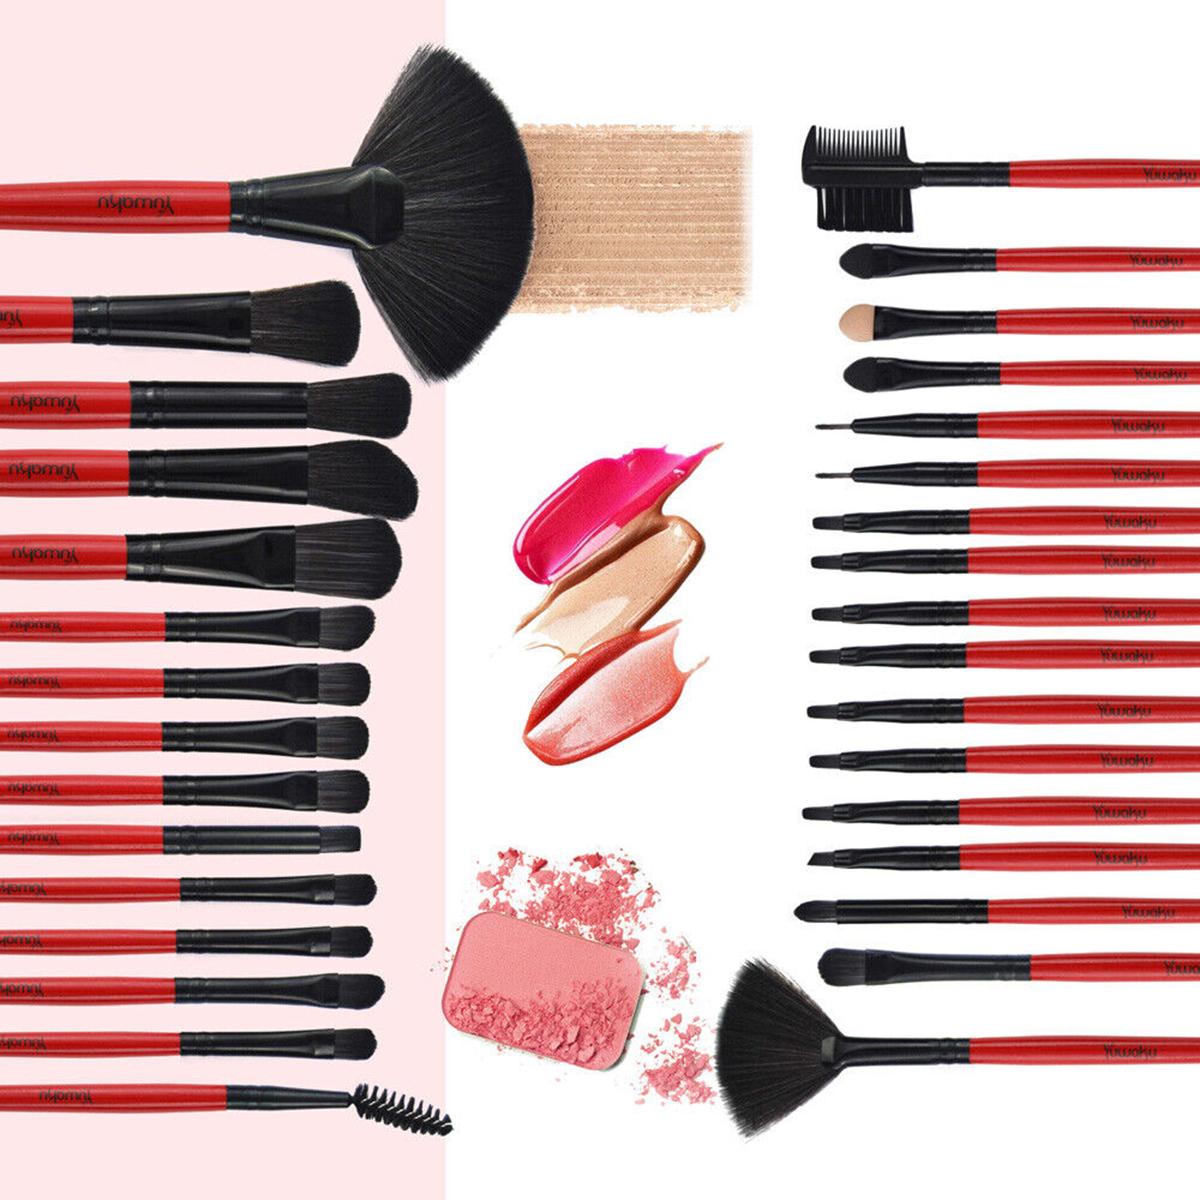 32PCS Professional Make Up Brushes Set Cosmetic Tool Makeup With Carry Bag